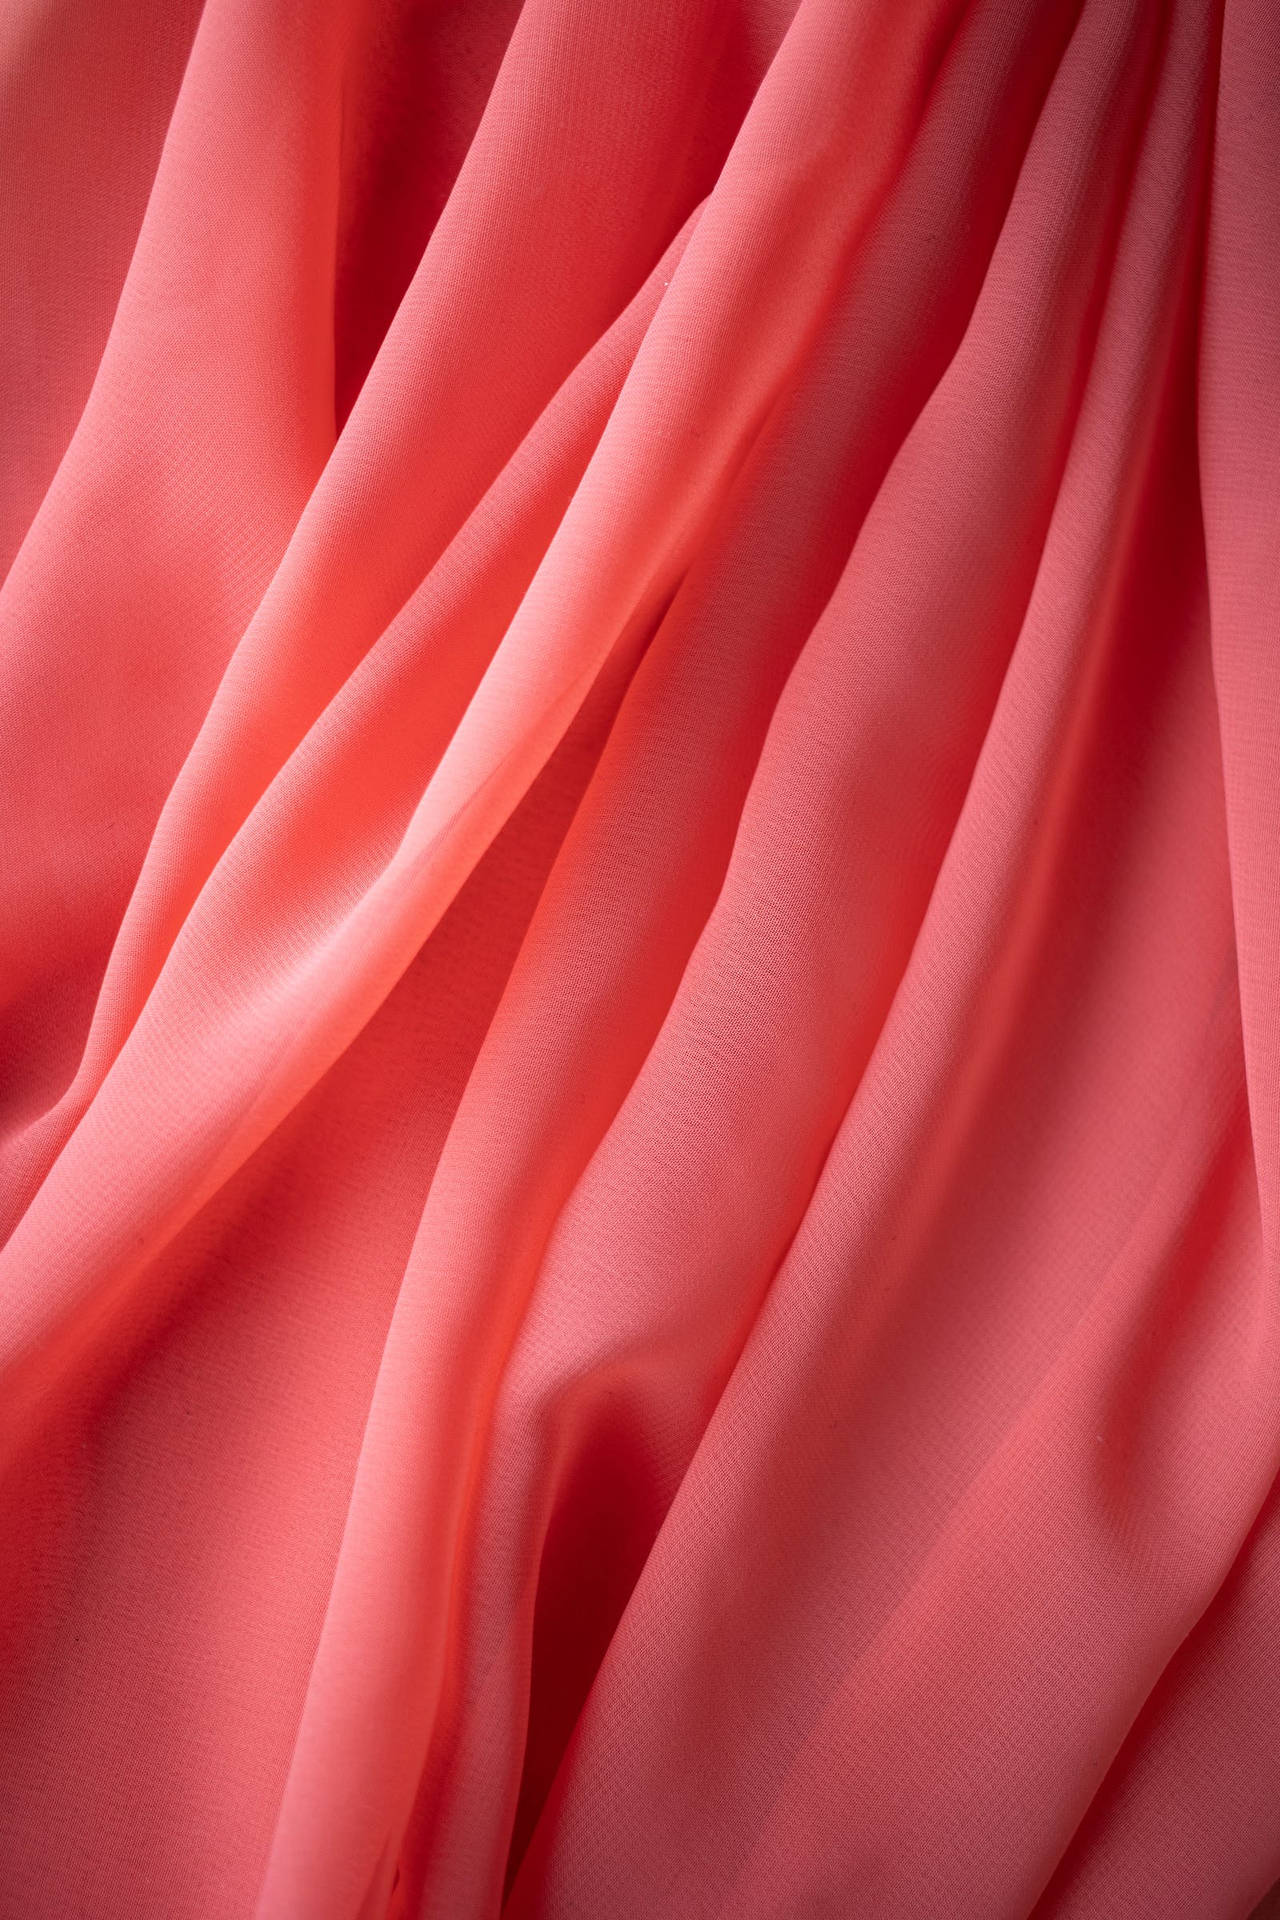 Crumpled Pastel Pink Color Fabric